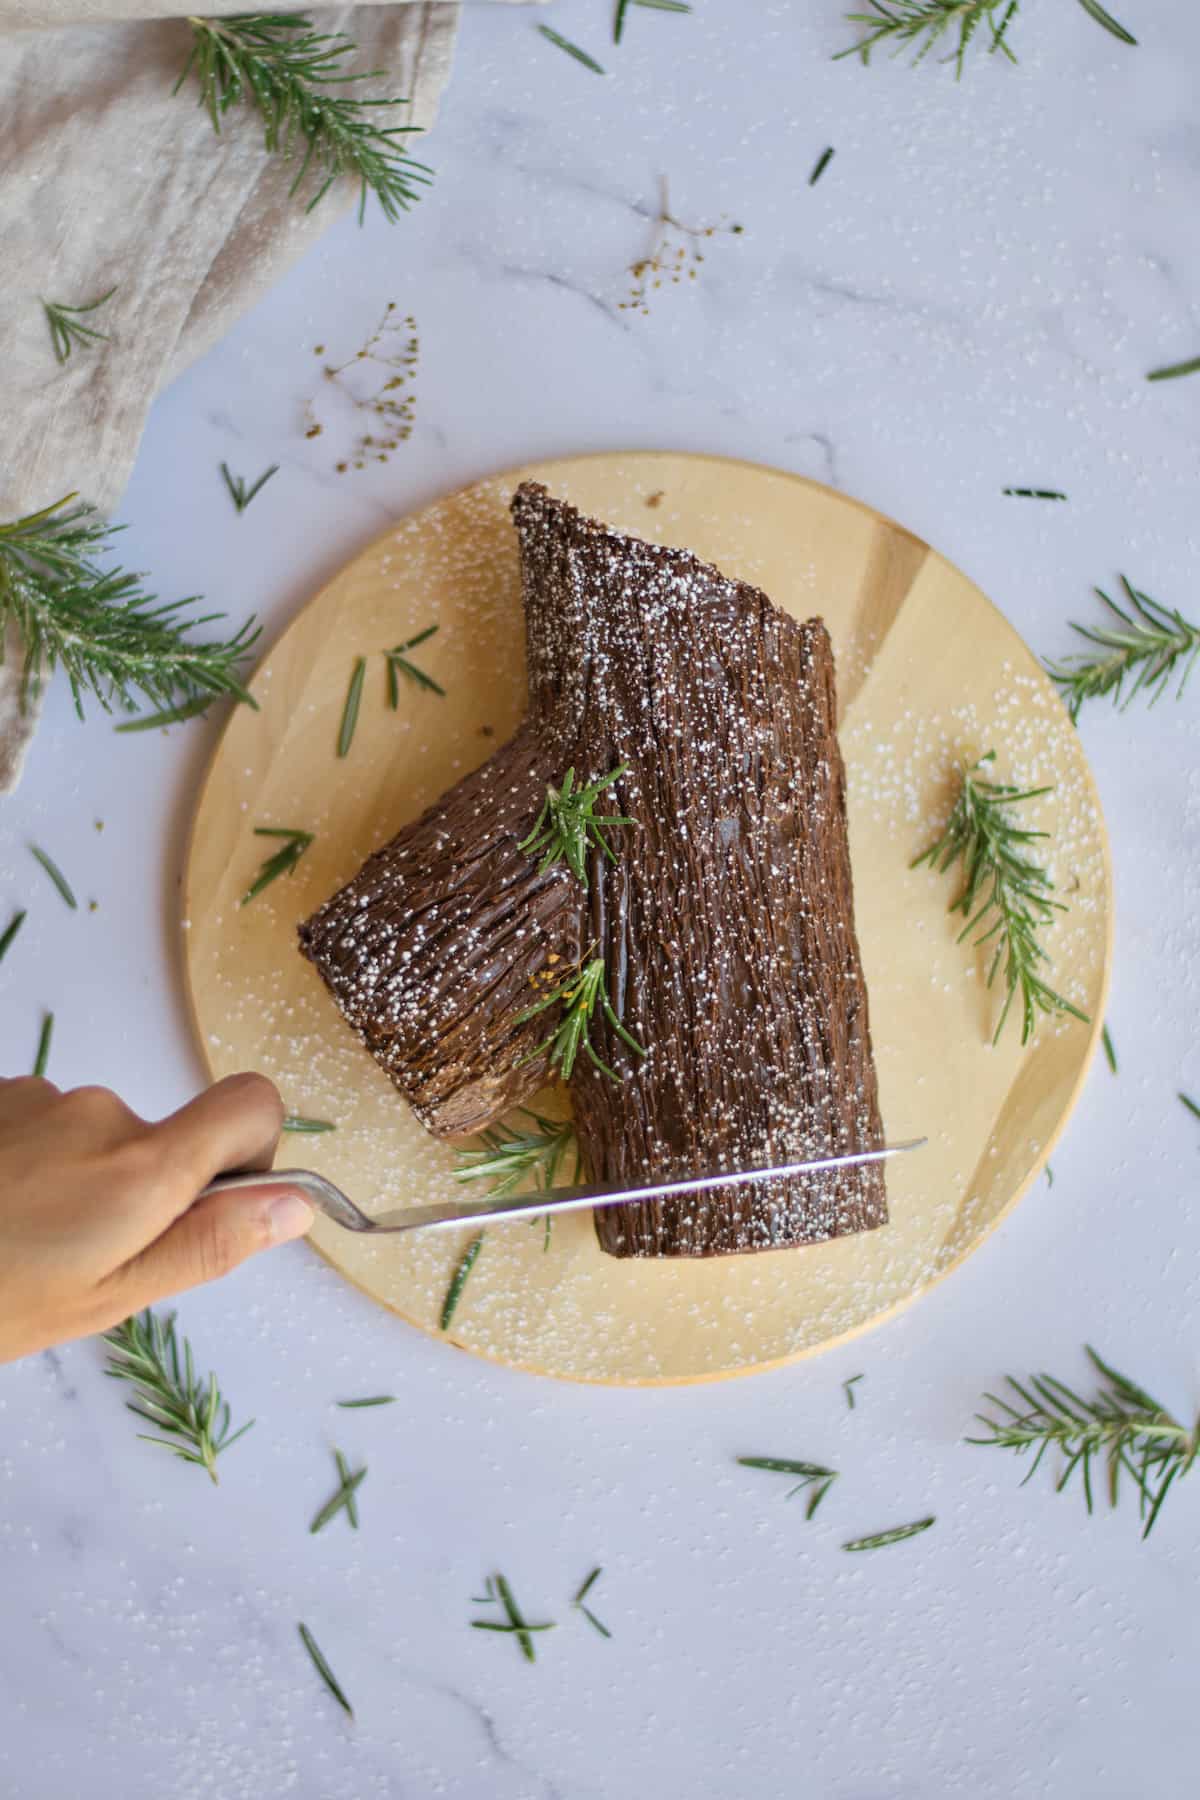 Chocolate rolled cake to look like yule log from above with knife cutting.